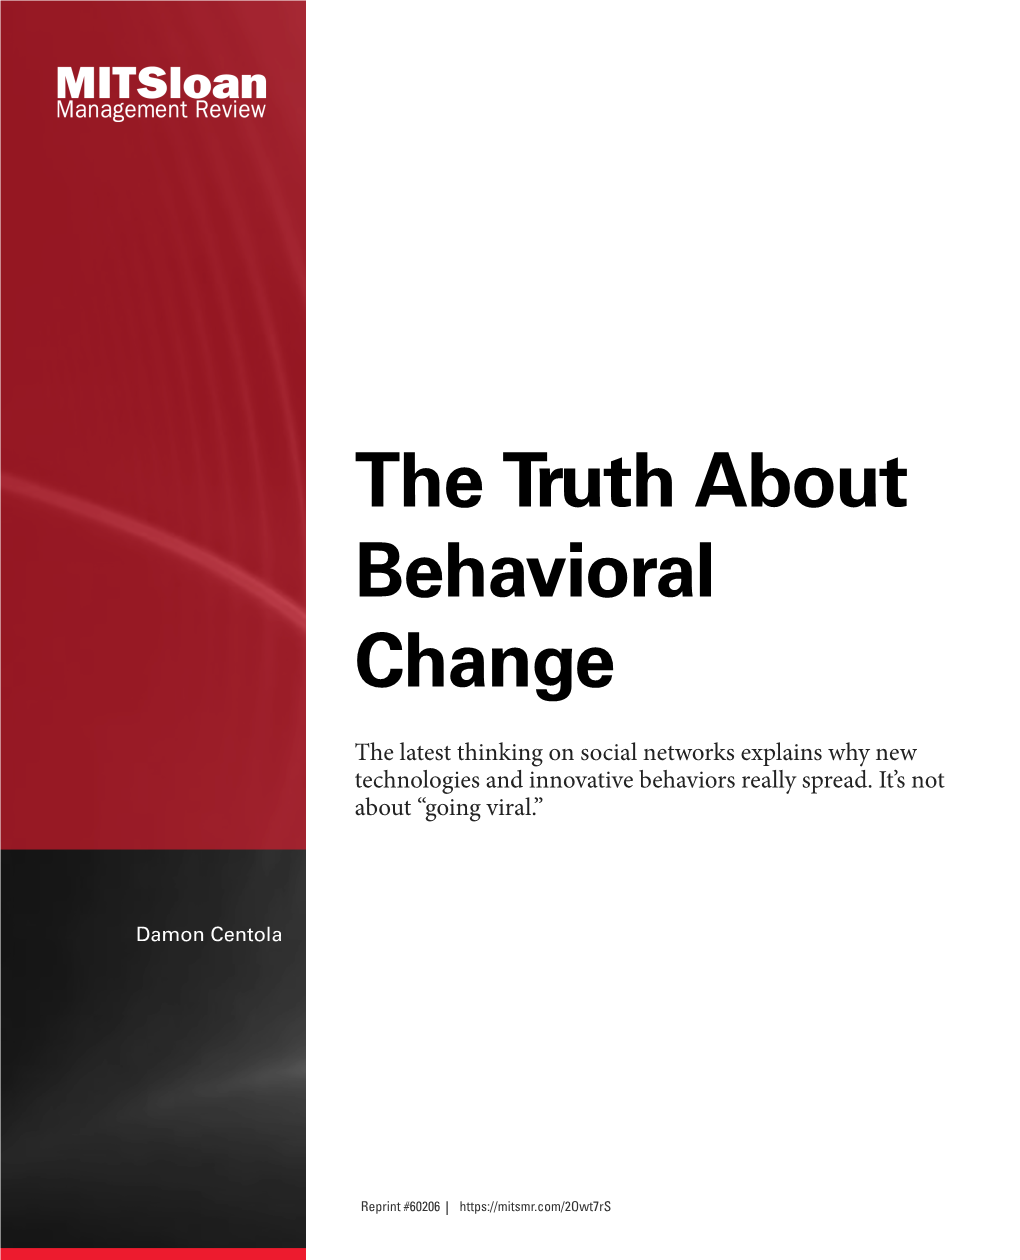 The Truth About Behavioral Change